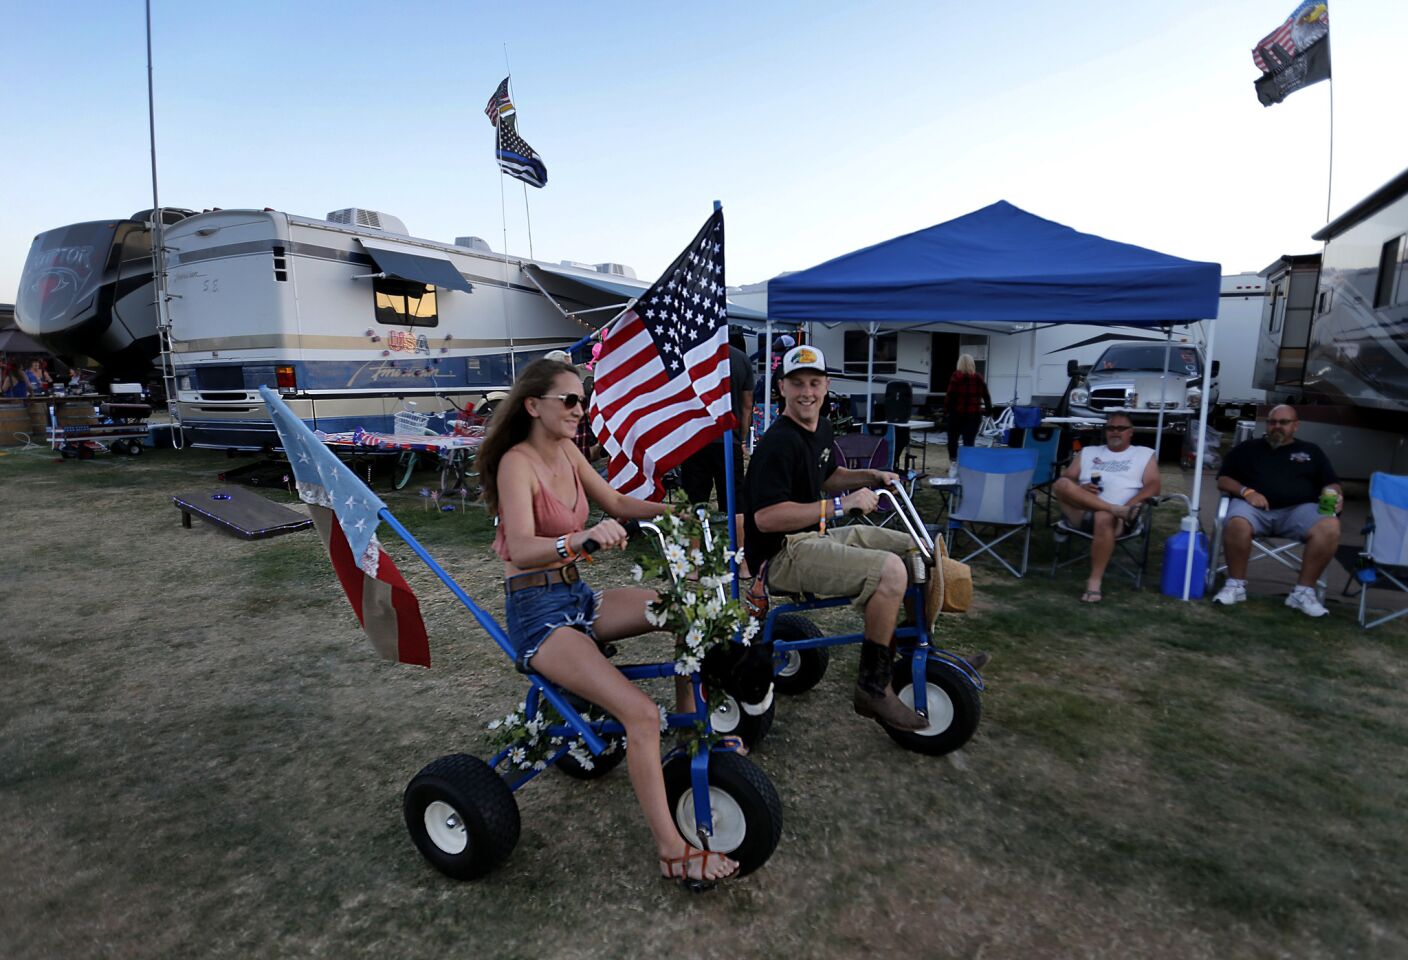 A couple cruise on three-wheel bikes with flags through the RV Resort for the 10th anniversary of the Stagecoach Country Music Festival.